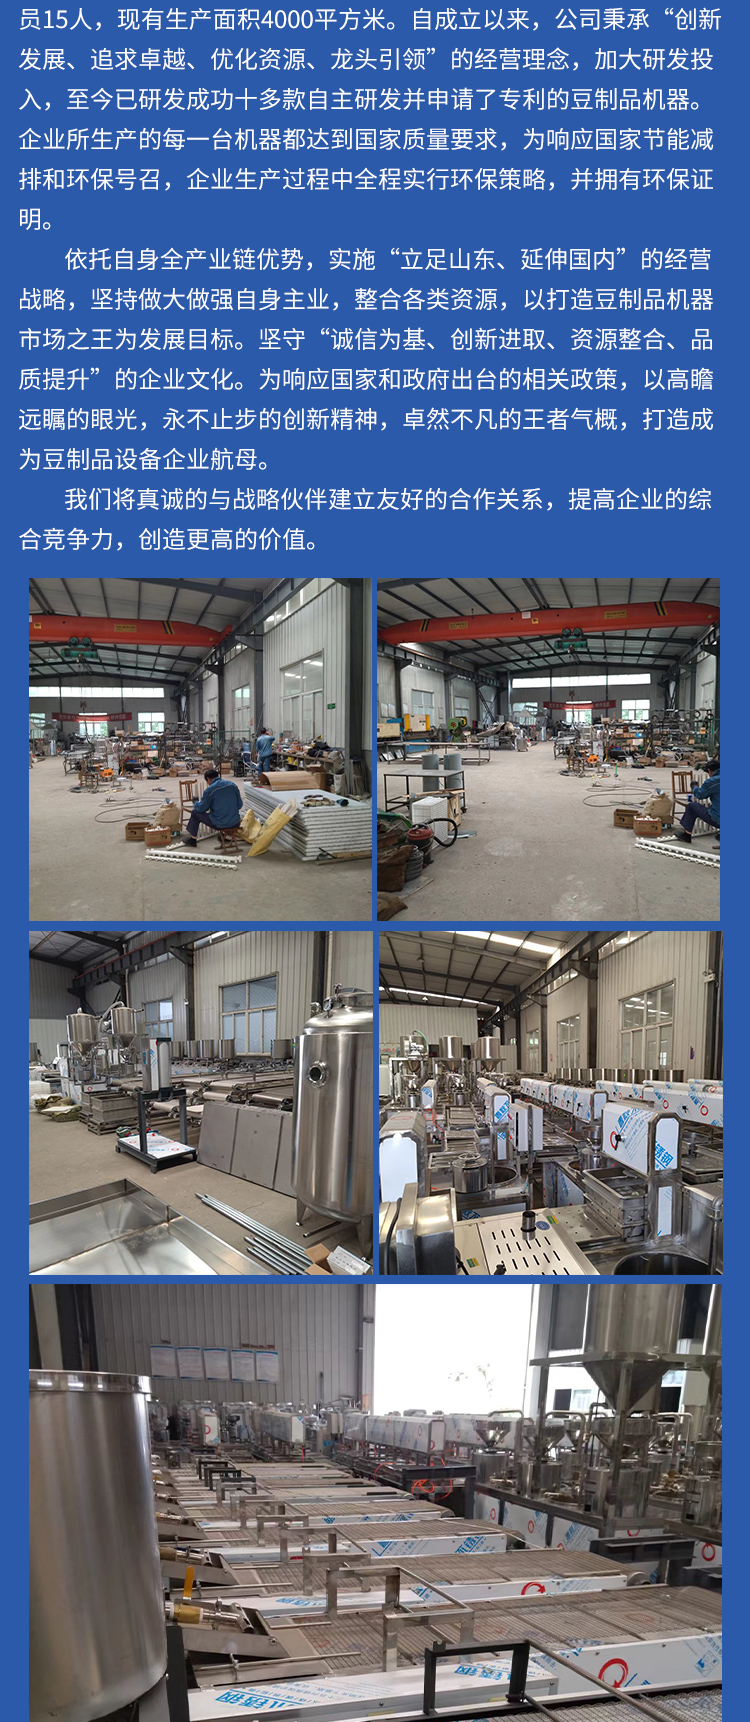 Large scale fully automatic tofu making machine with dual tofu grinding machine, bean products and food machinery